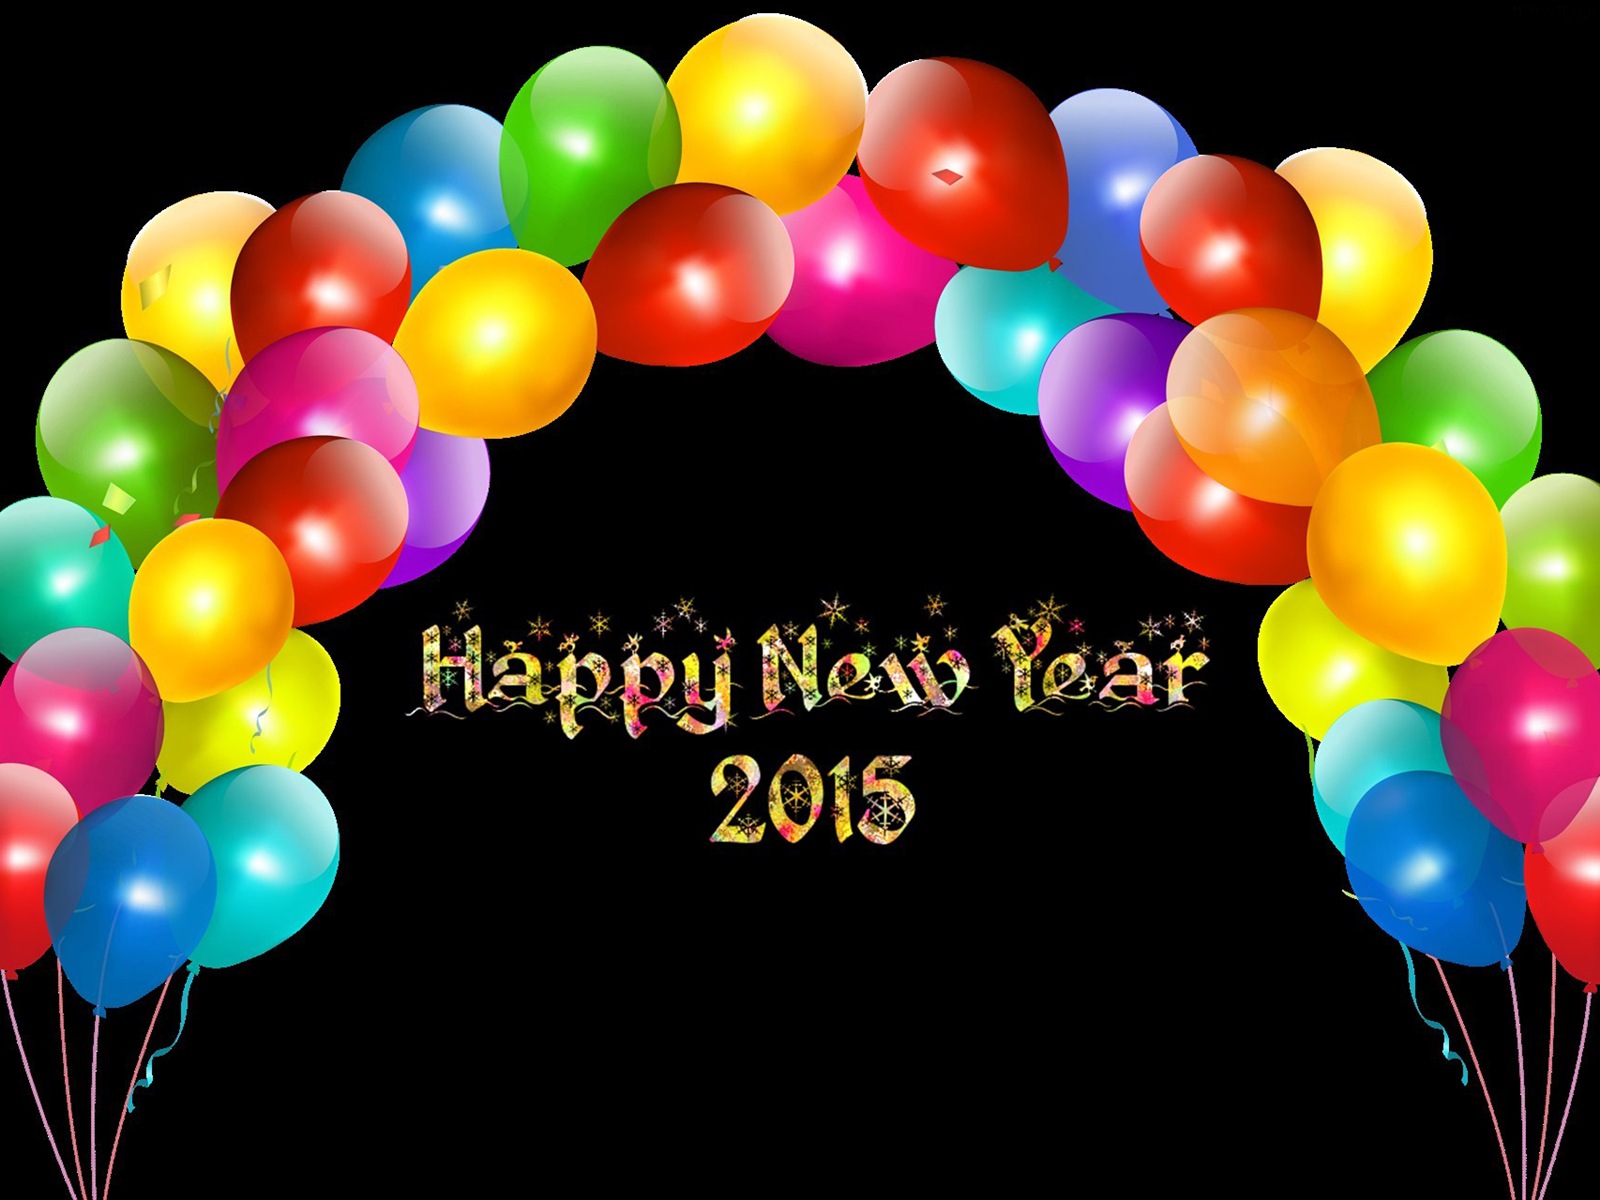 2015 New Year theme HD wallpapers (2) #6 - 1600x1200